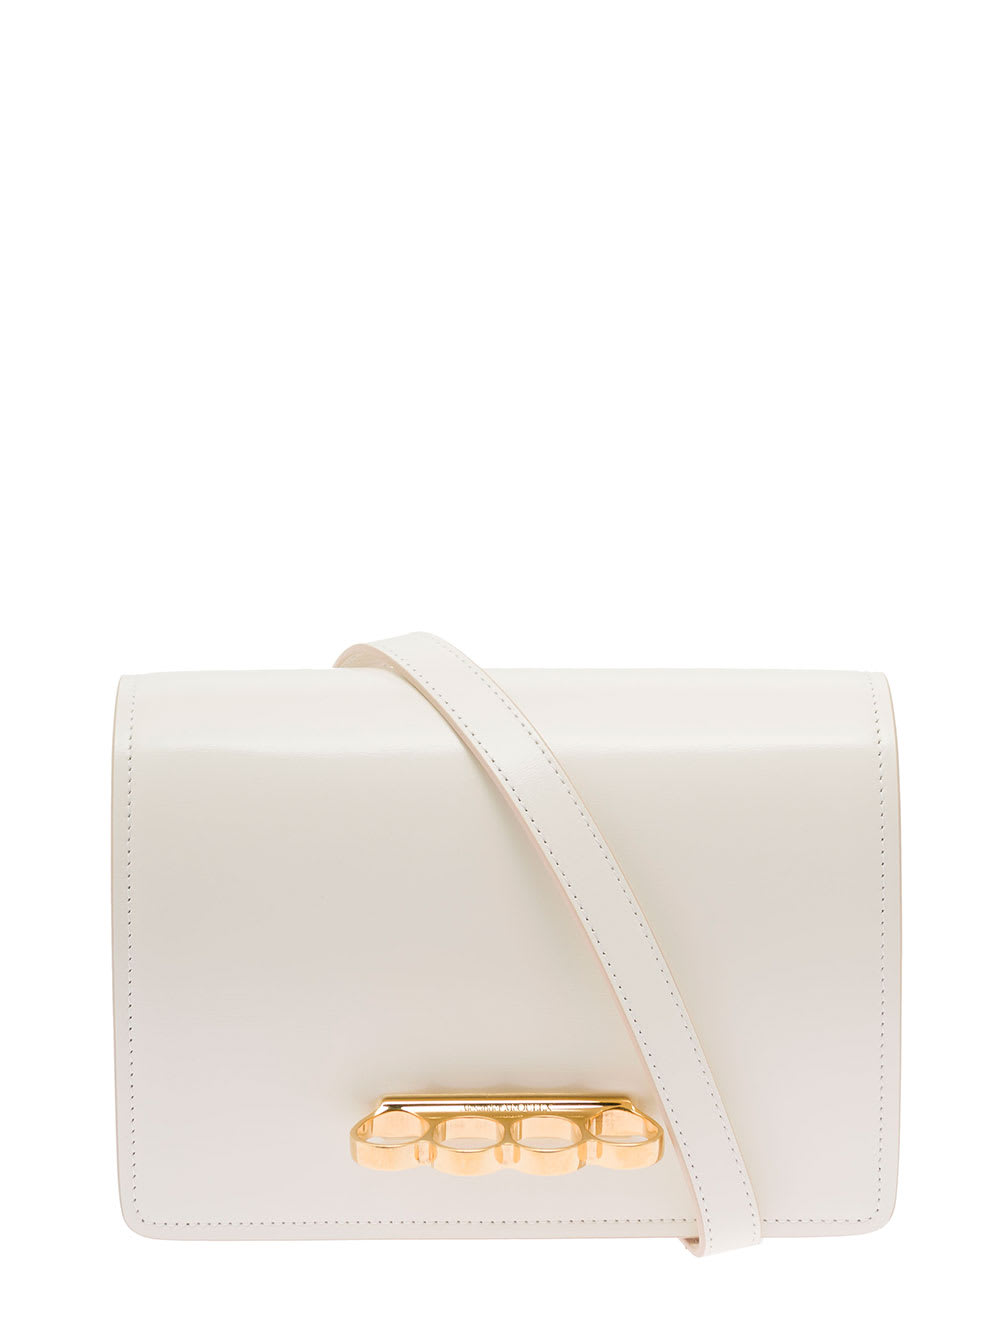 Alexander Mcqueen Womans Four Ring White Leather Crossbody Bag